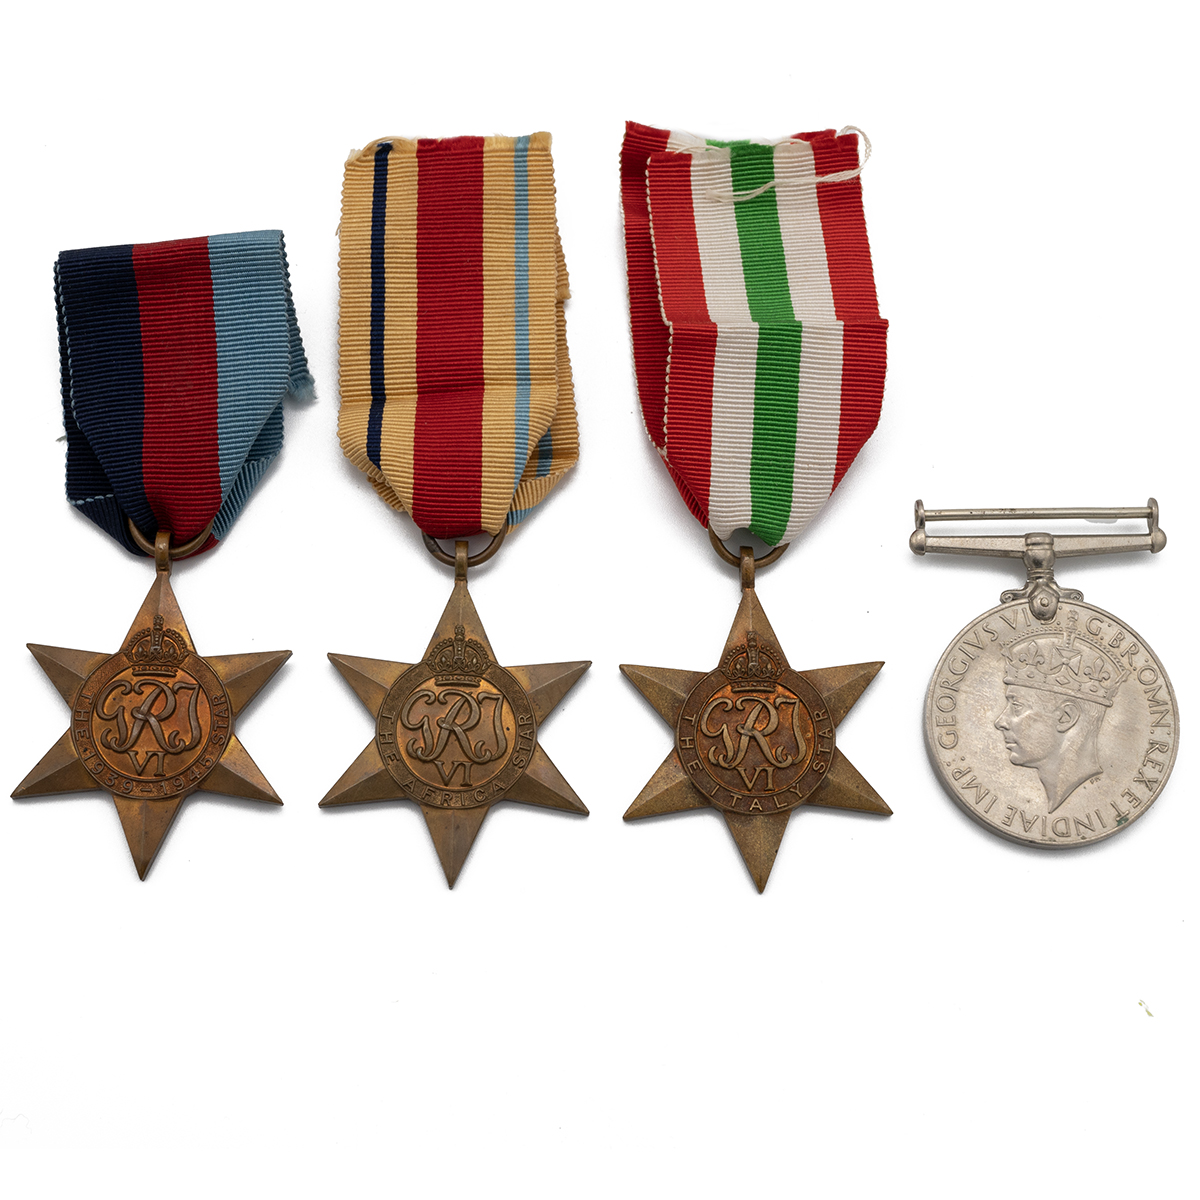 Medals (4) of MX.739632 A Williams R.N. 1939-1945 Star, Africa Star, Italy Star, and War Medal 19... - Image 2 of 2